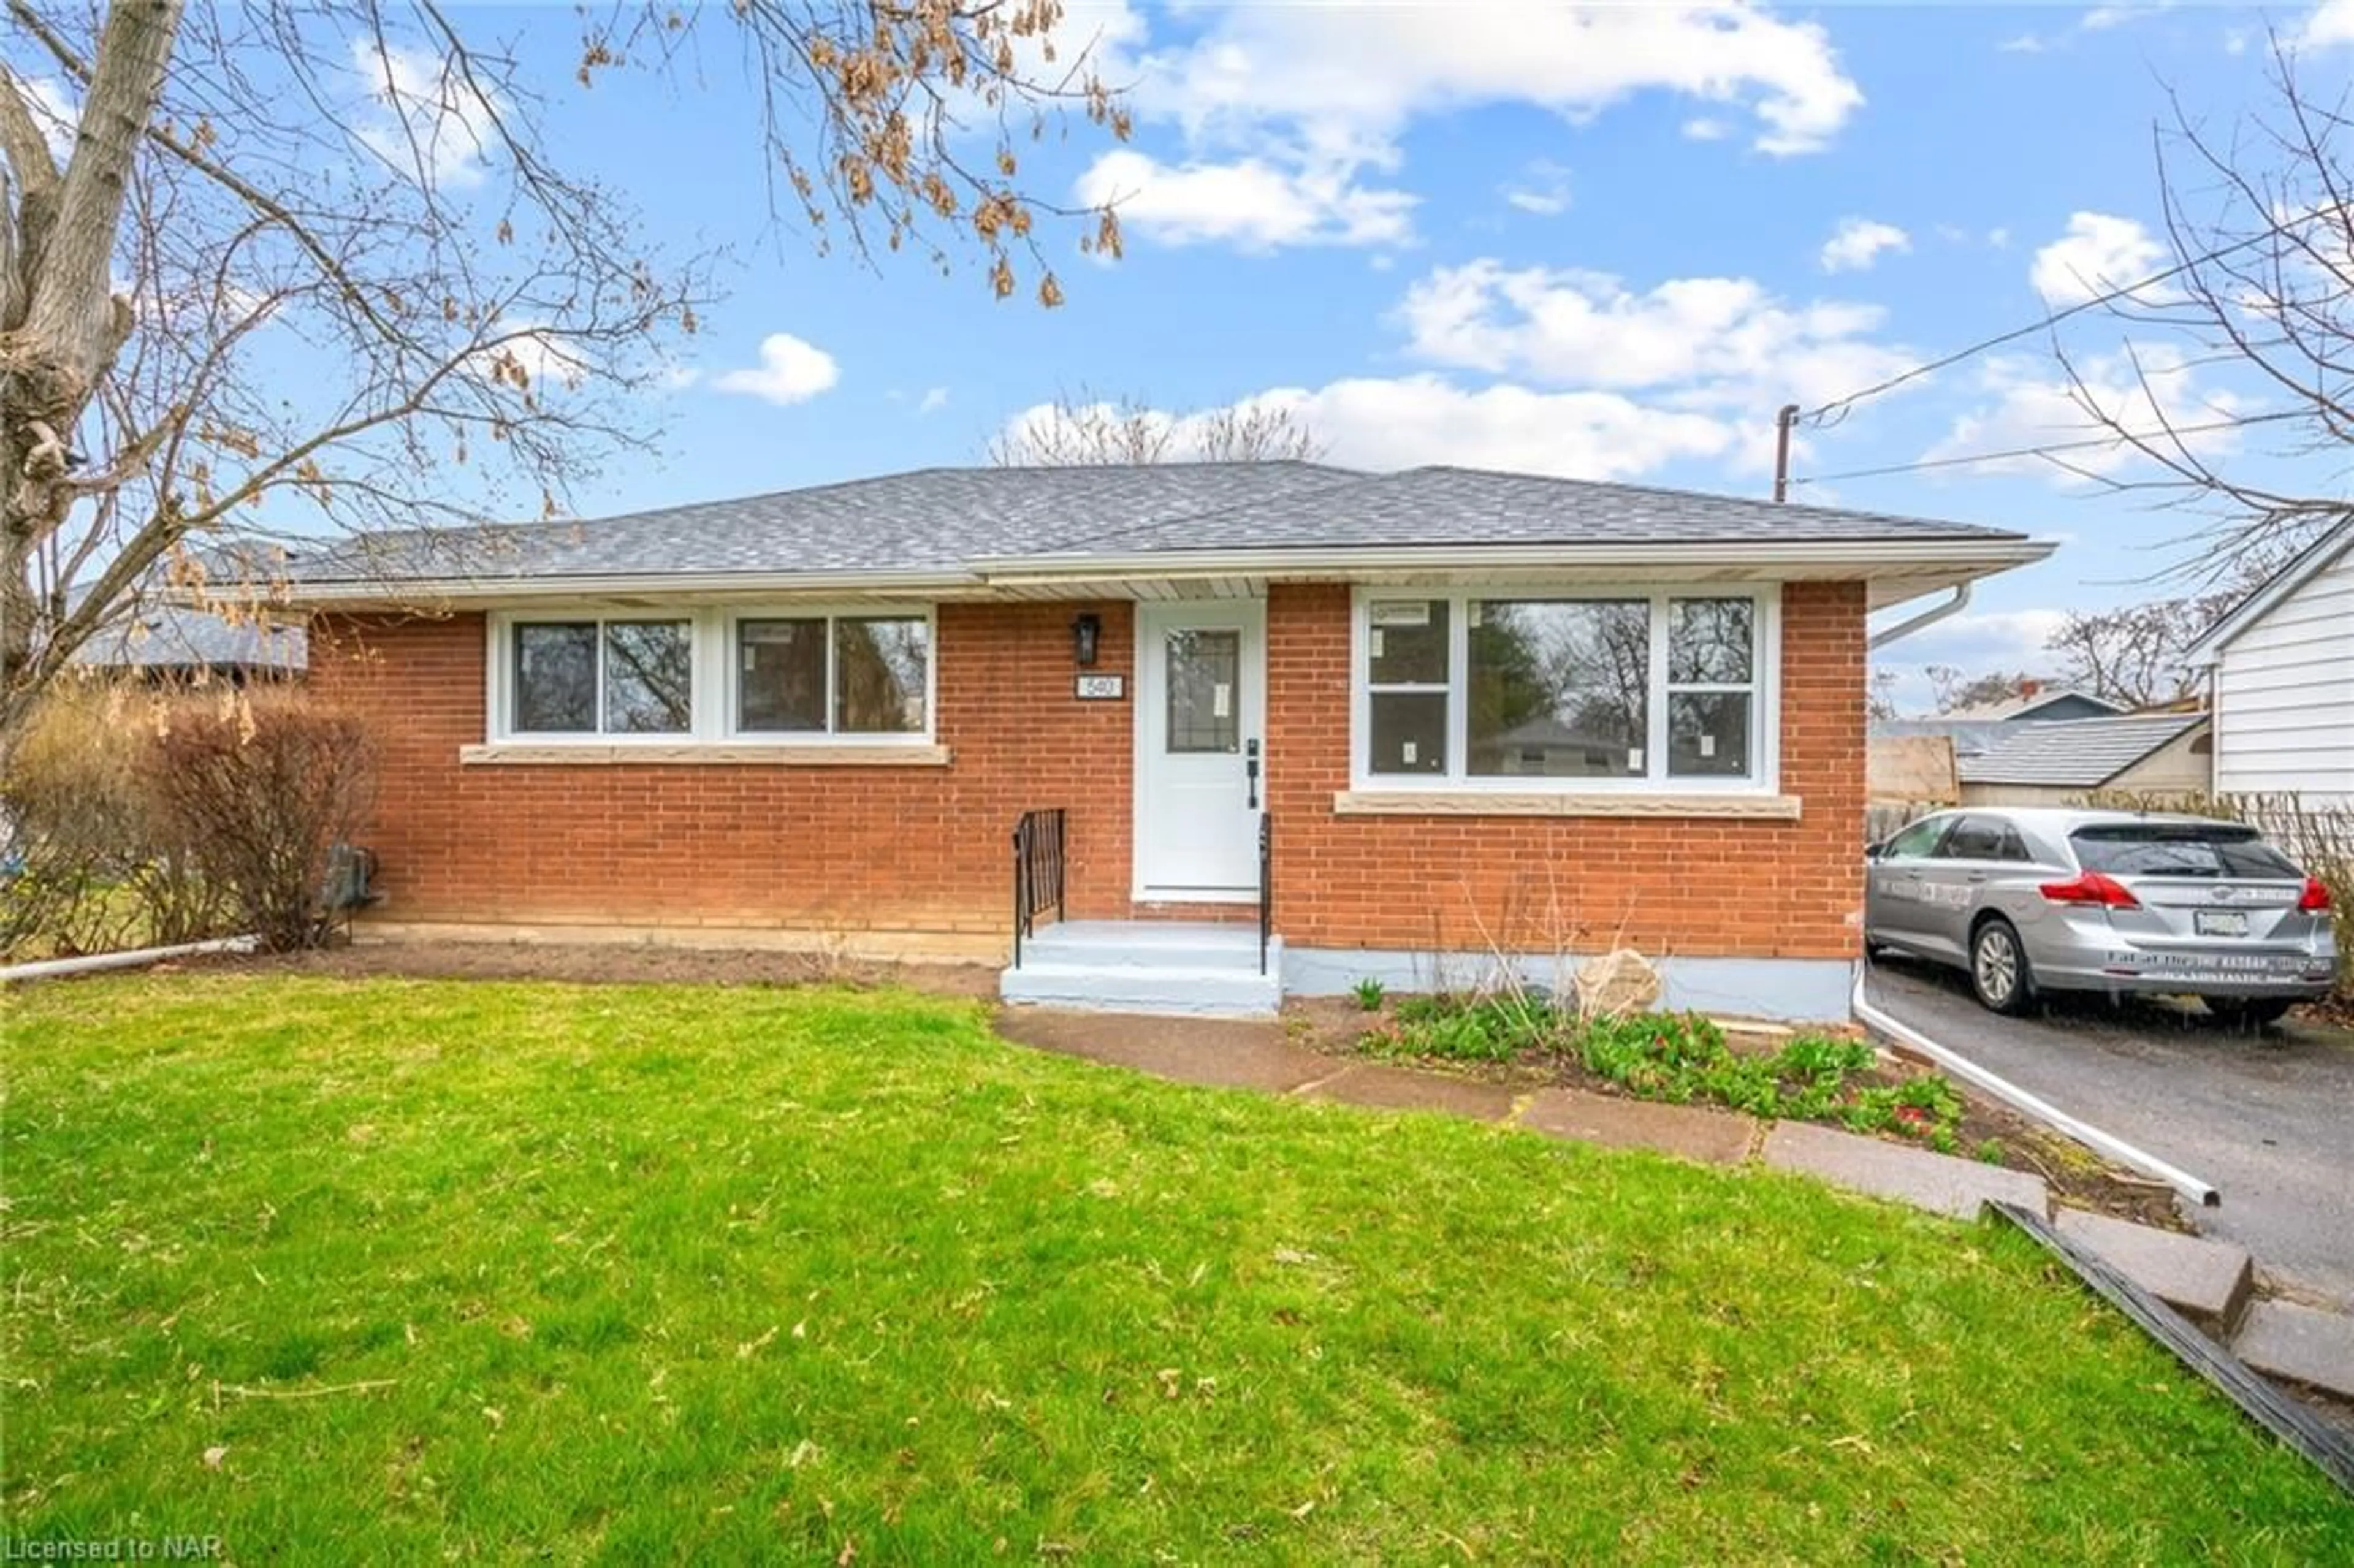 Home with brick exterior material for 540 Geneva St, St. Catharines Ontario L2N 2H9